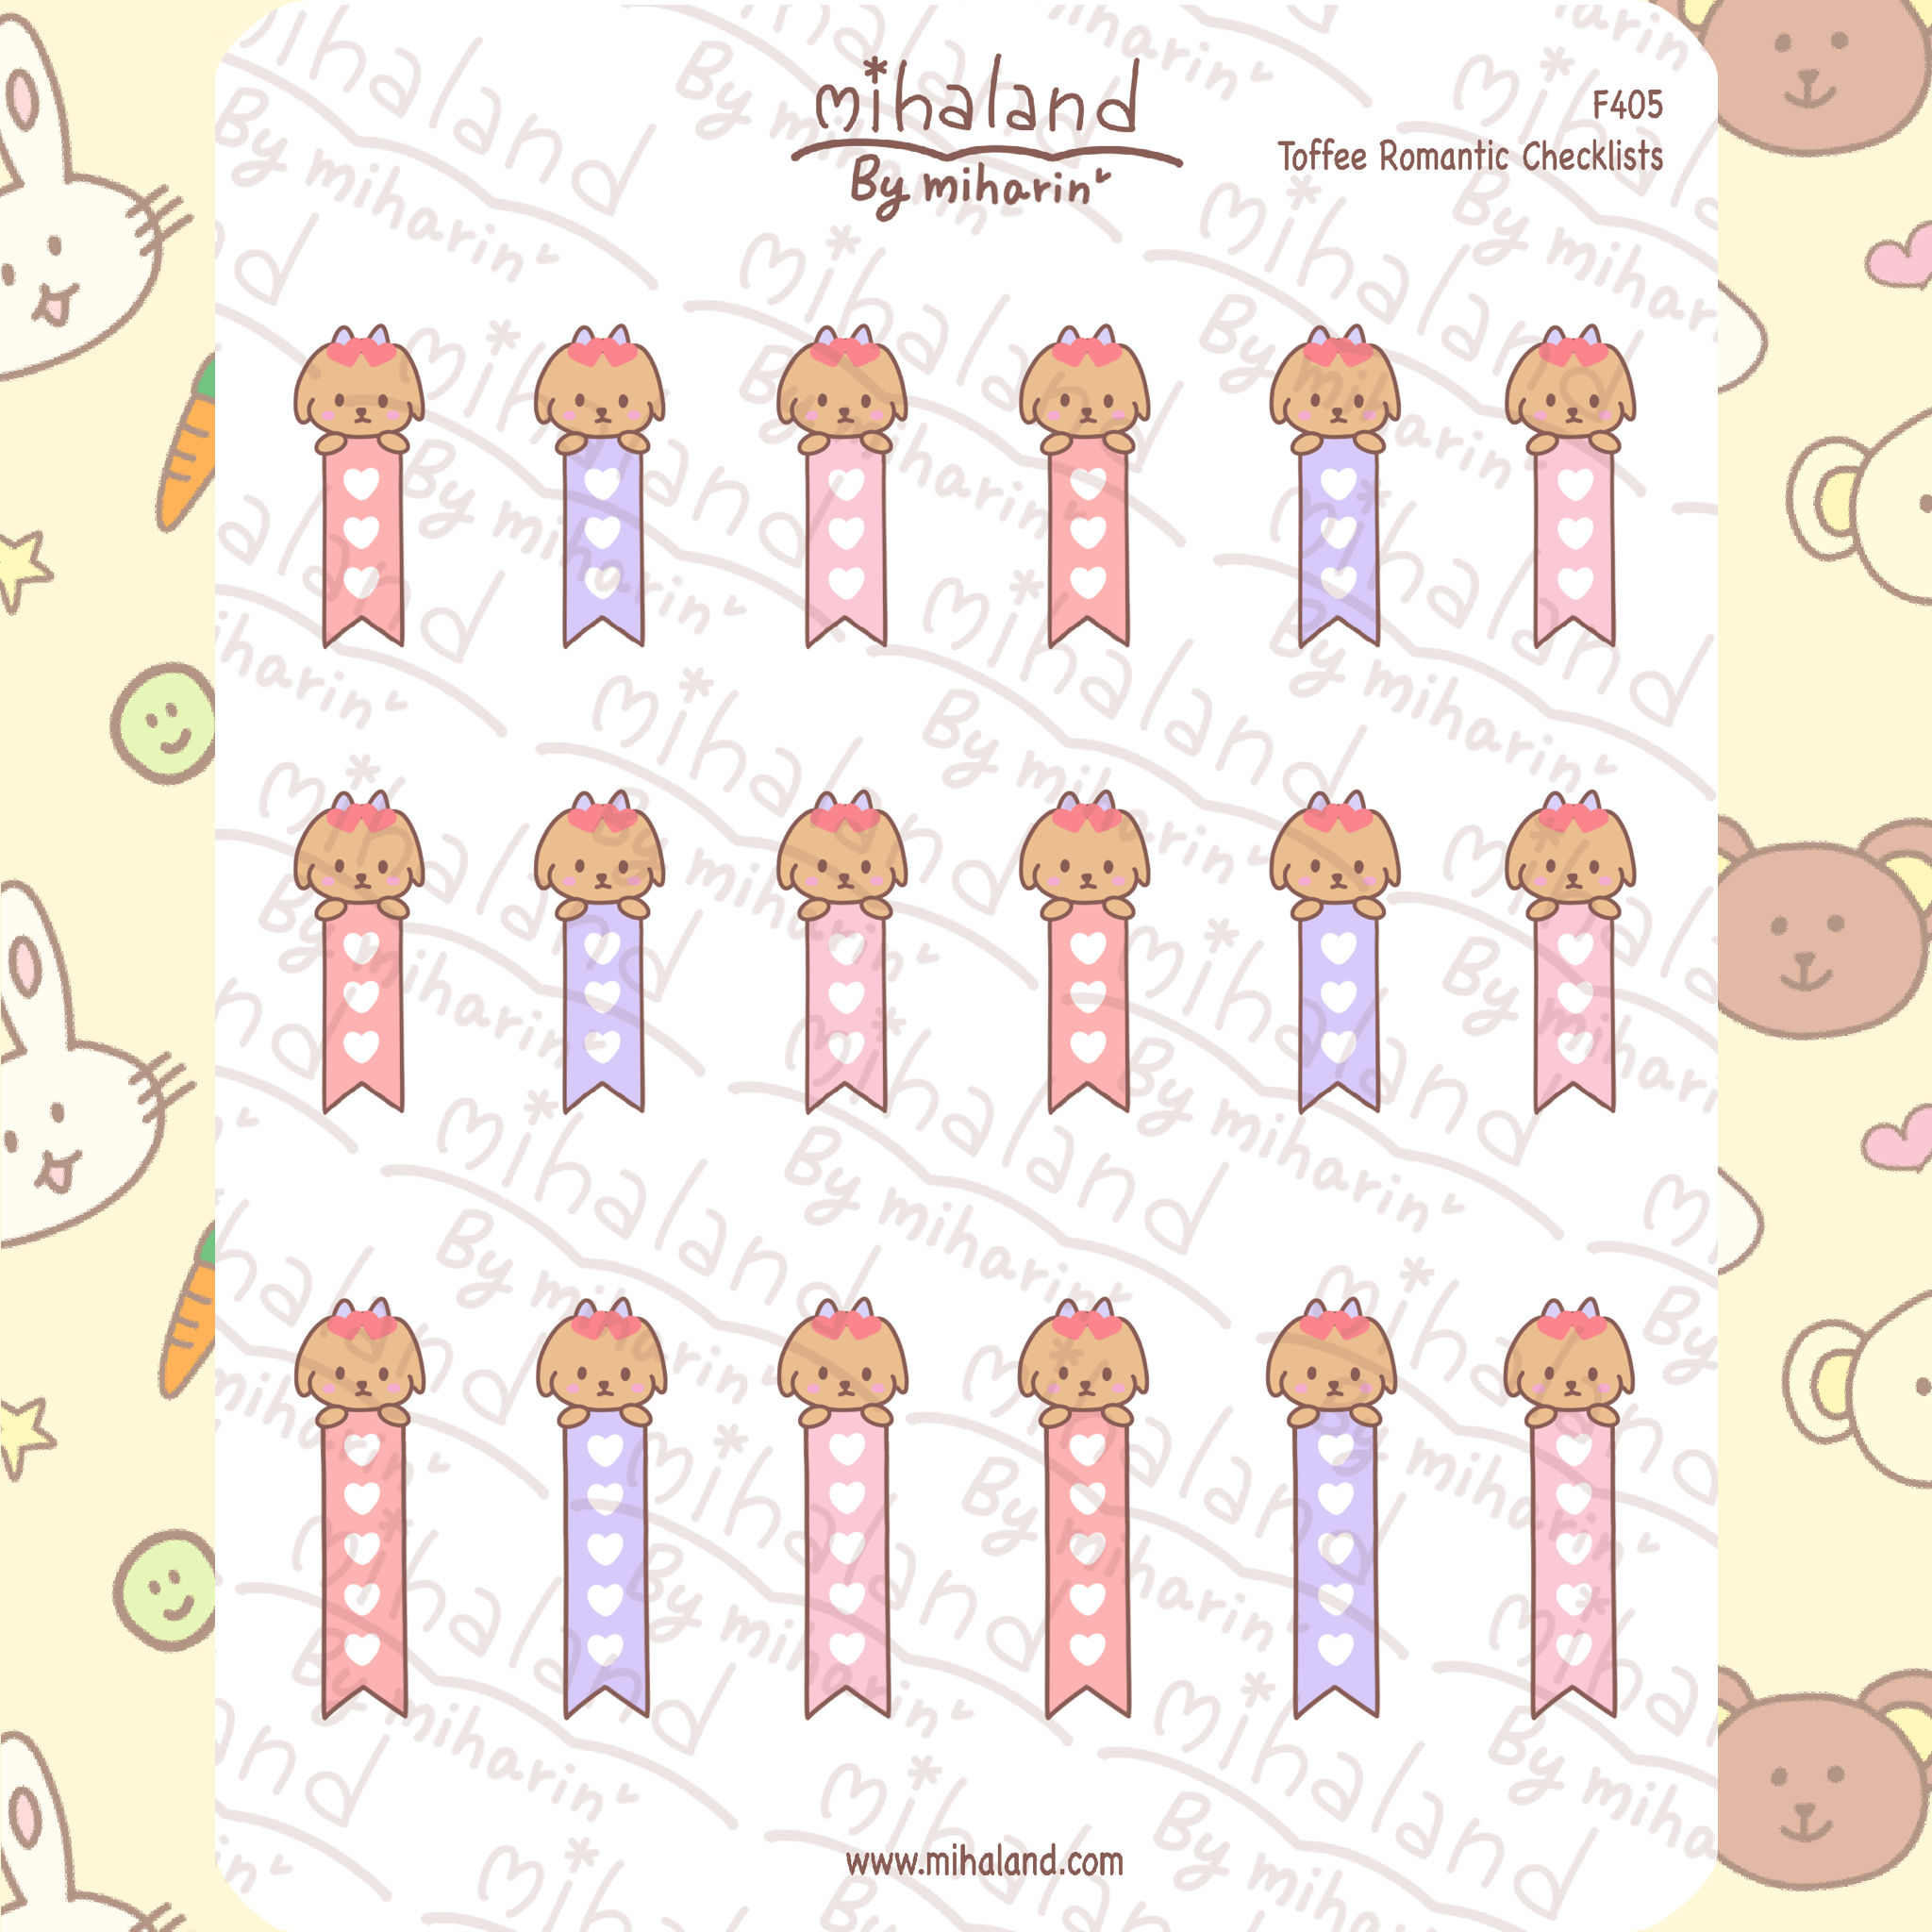 Toffee Romantic Checklists Planner Stickers (F405)